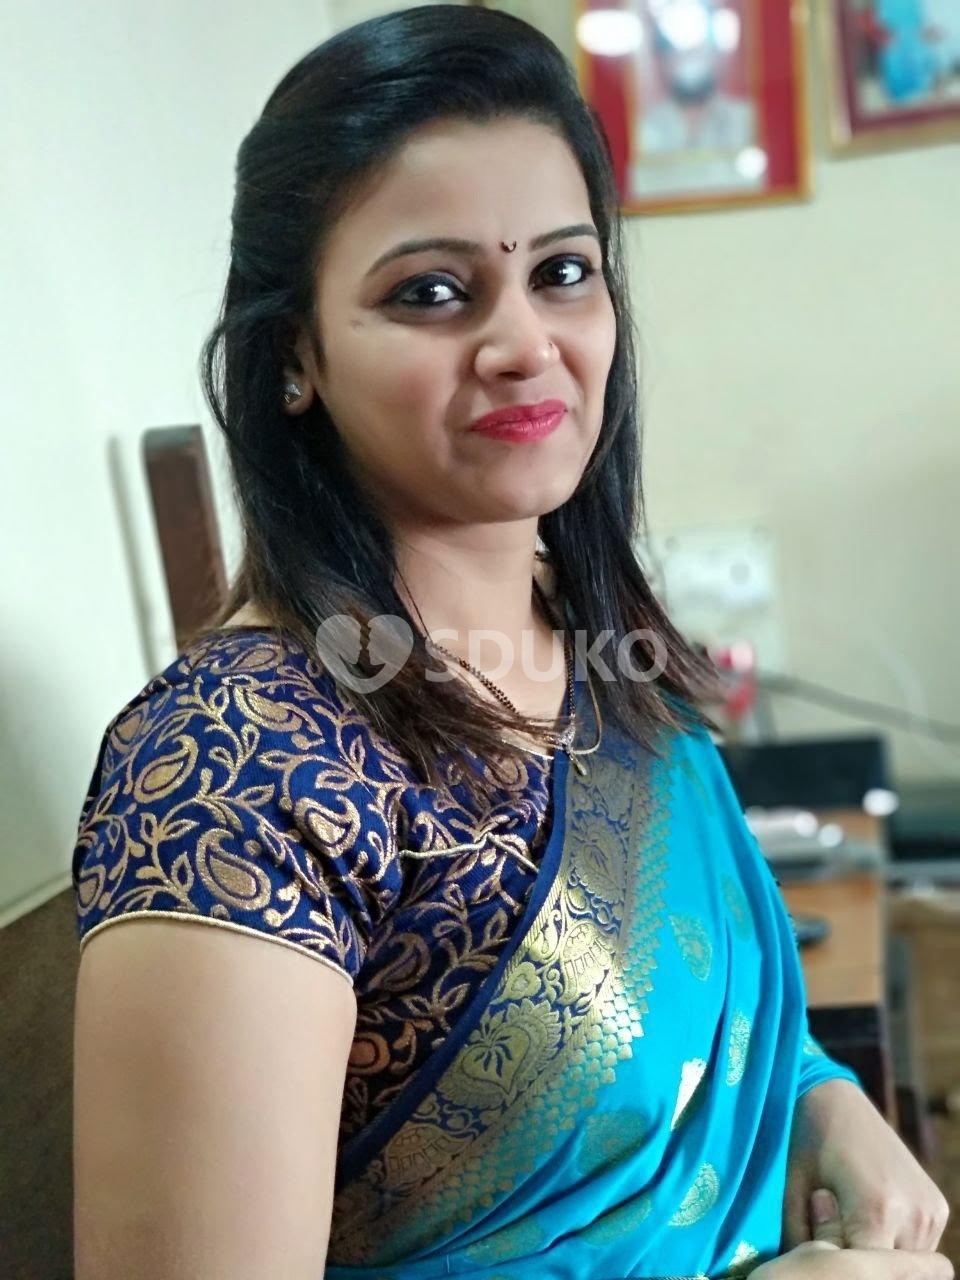 Kannur........low price 🥰100% SAFE AND SECURE TODAY LOW PRICE UNLIMITED ENJOY HOT COLLEGE GIRL HOUSEWIFE AUNTIES AVAI